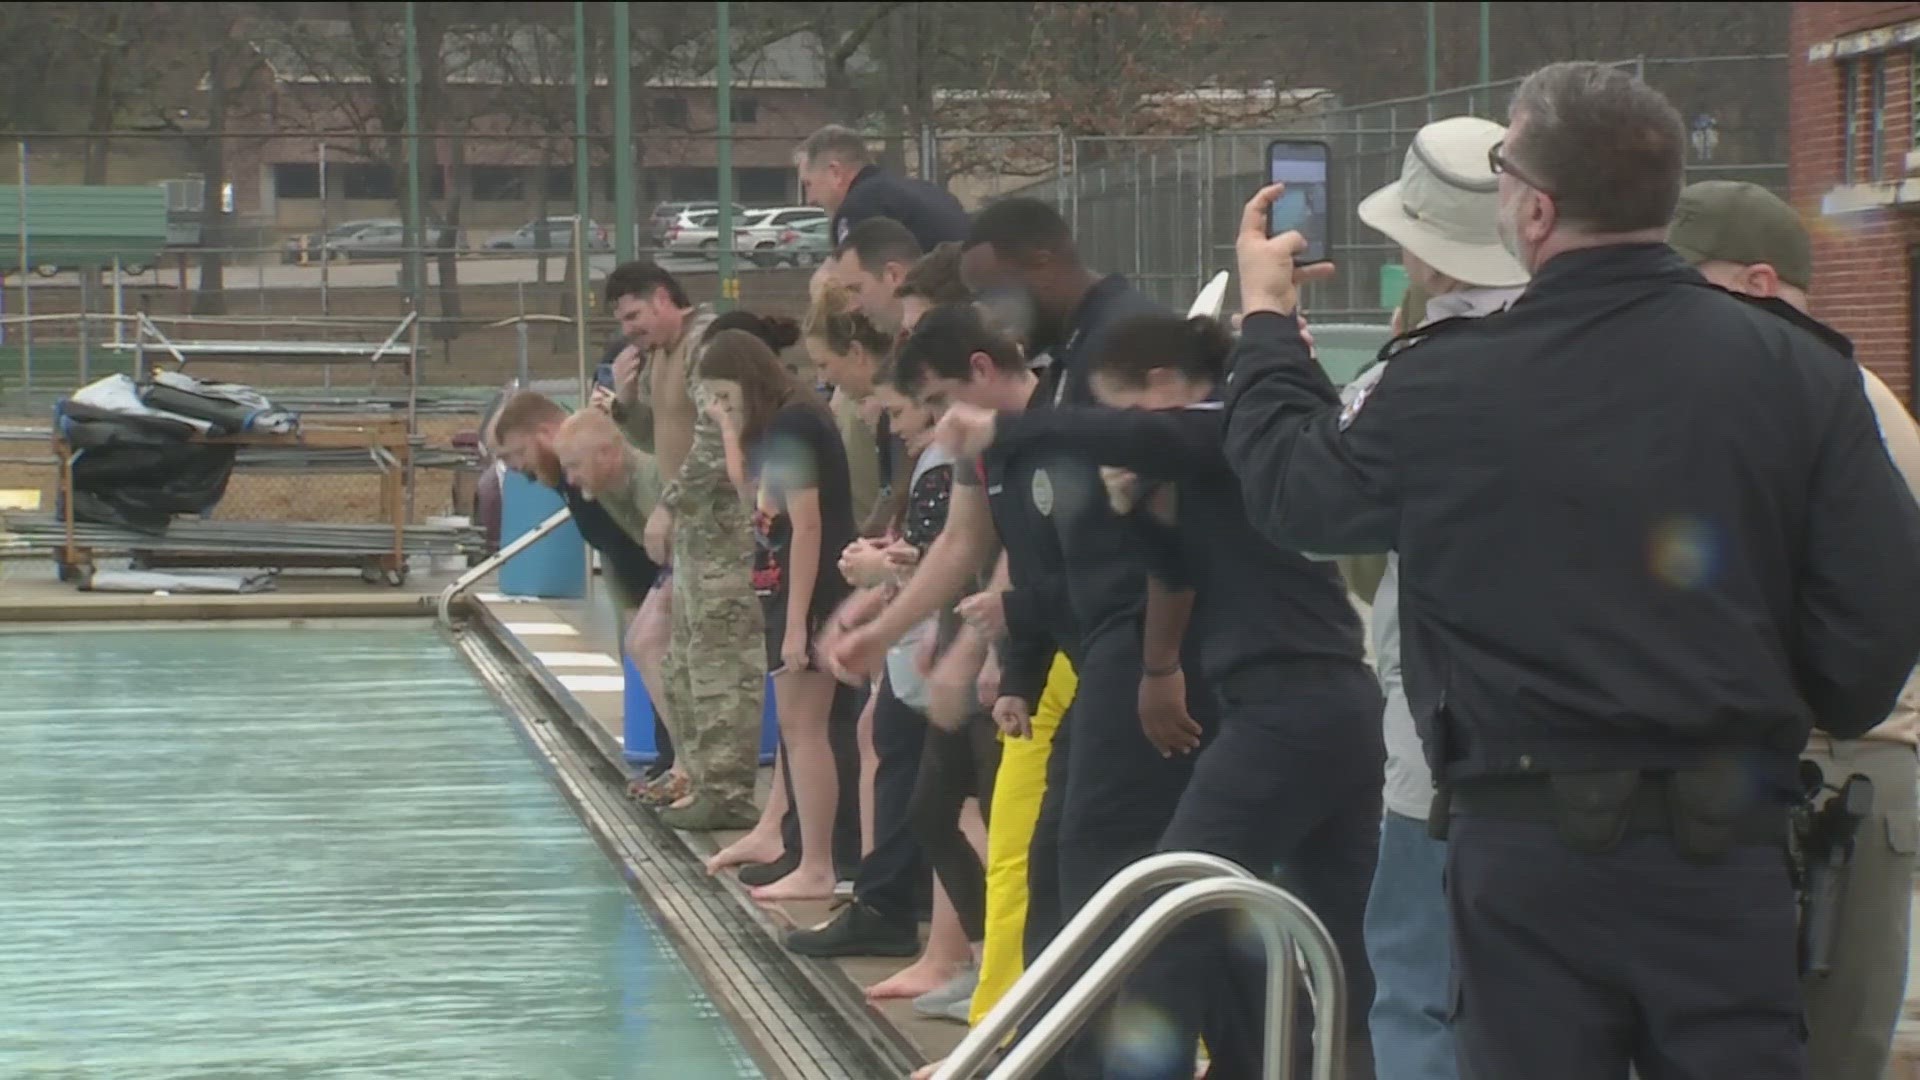 DEPSITE THE RAIN THIS MORNING, PEOPLE GATHERED IN FORT SMITH FOR THE ANNUAL POLAR PLUNGE.